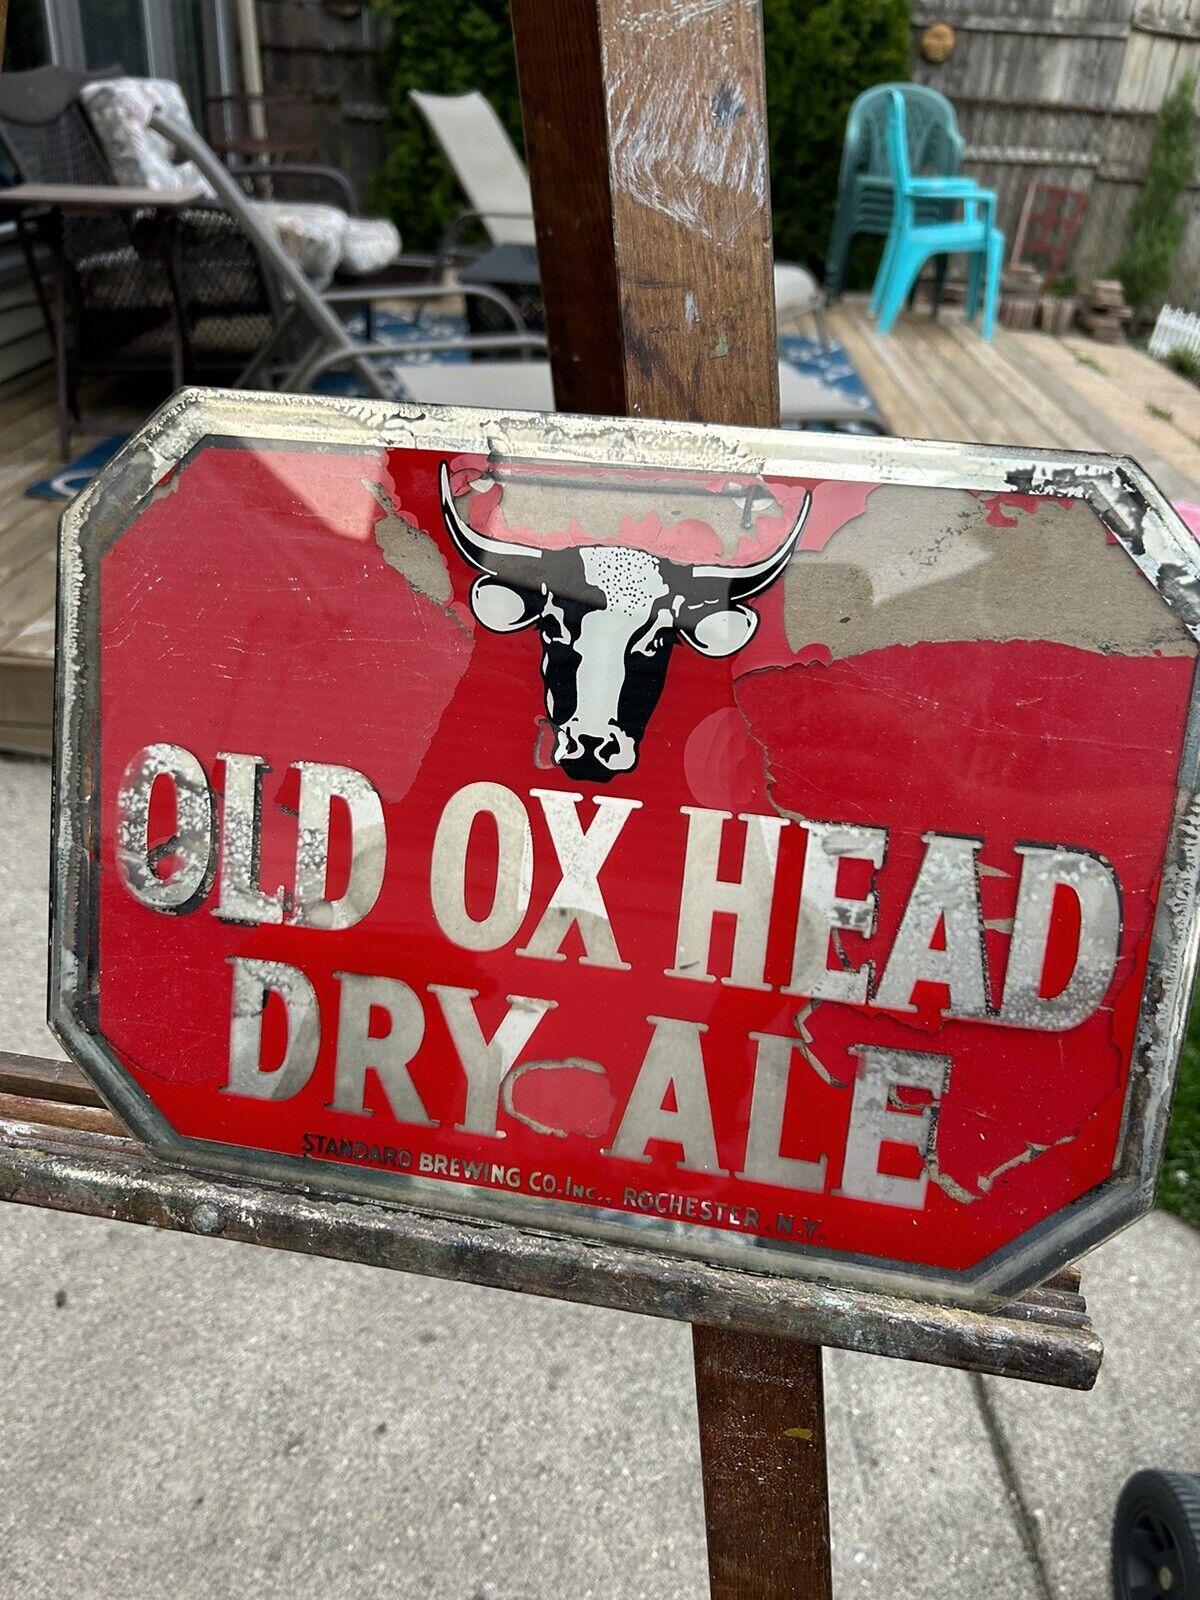 VTG Old Ox Head Dry Ale Beer Advertising Sign Glass Standard Brewing Bar Mancave